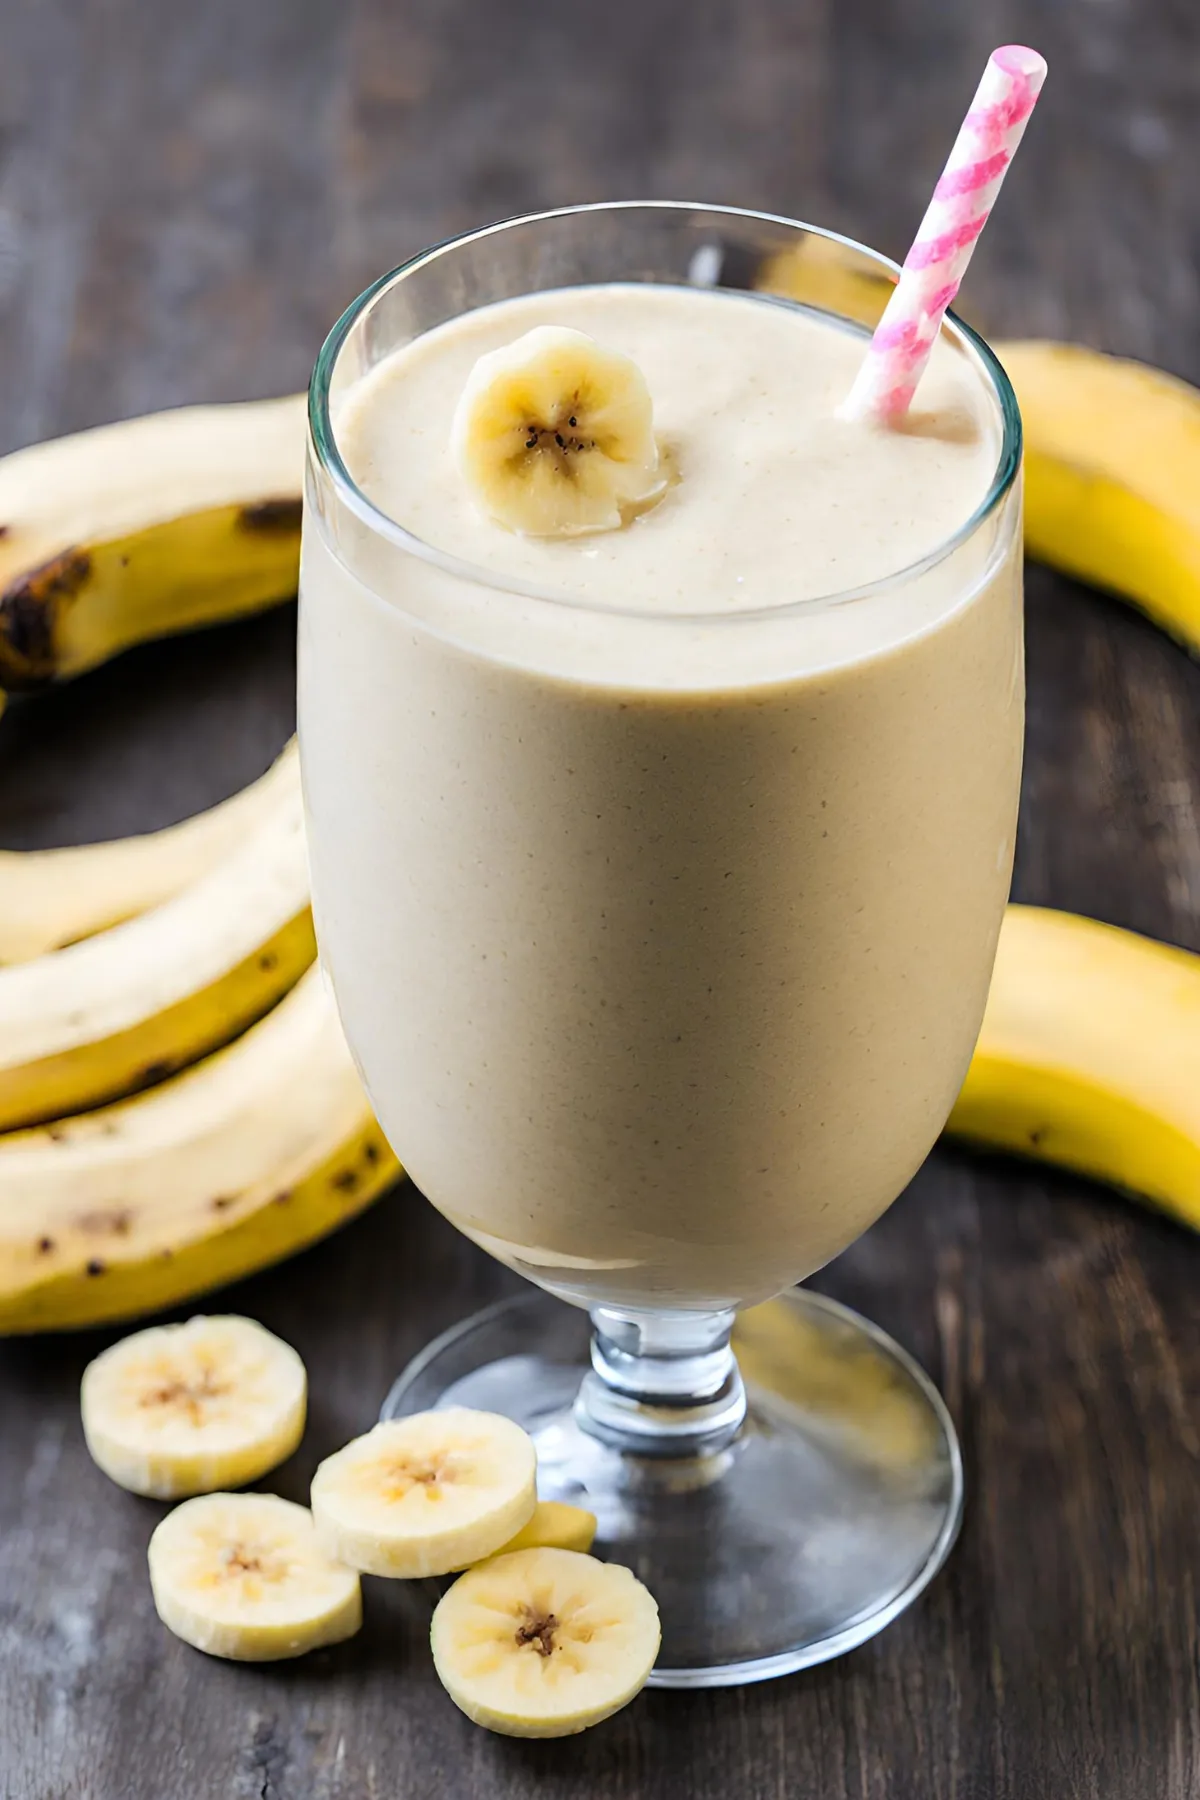 Step-by-Step Recipe for Banana Smoothie Without Yogurt